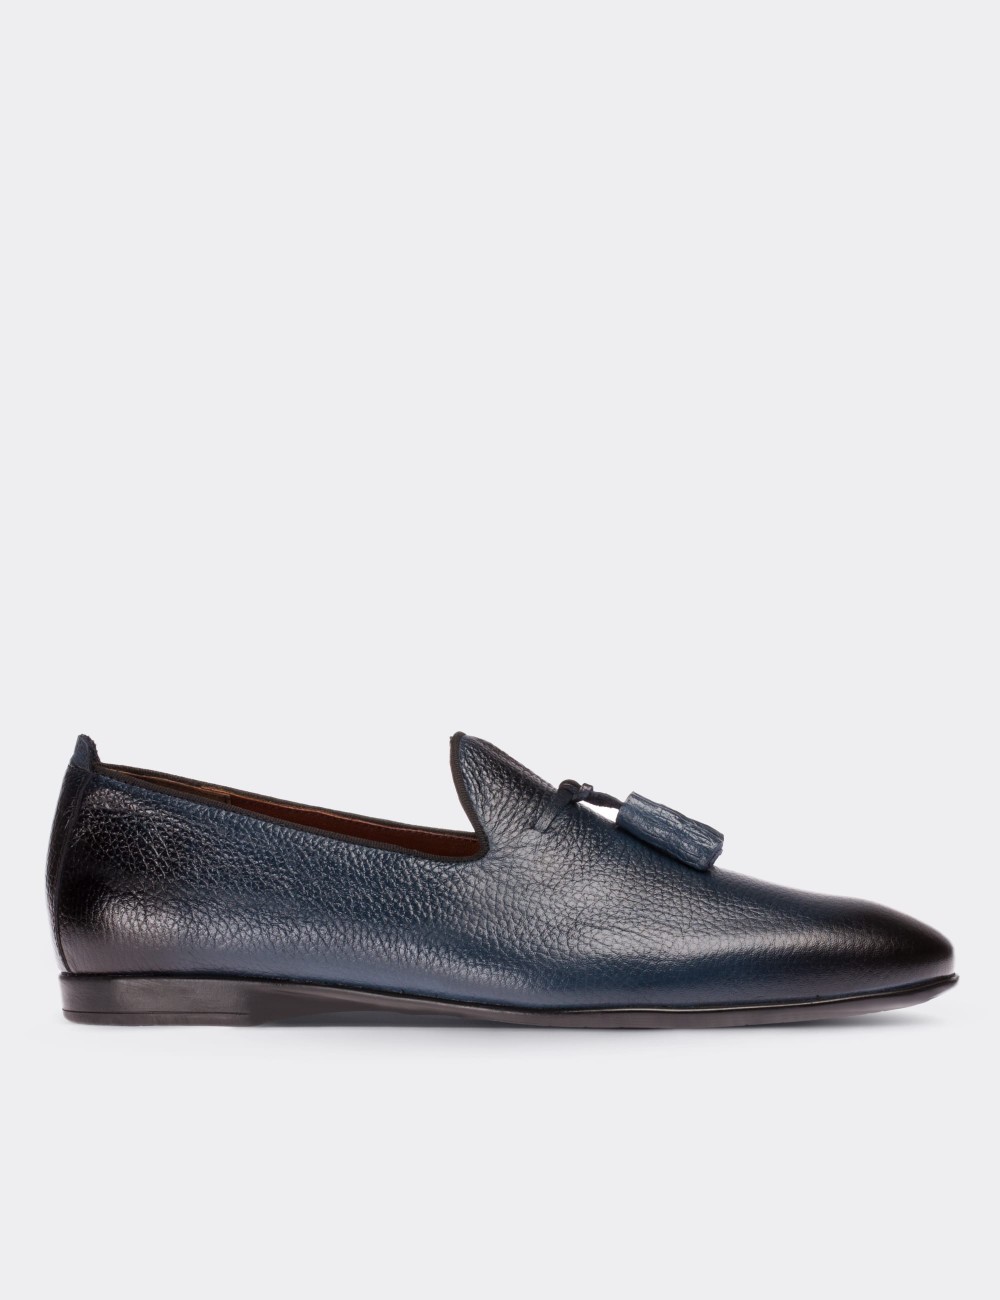 Navy  Leather Loafers Shoes - 01702MLCVC01